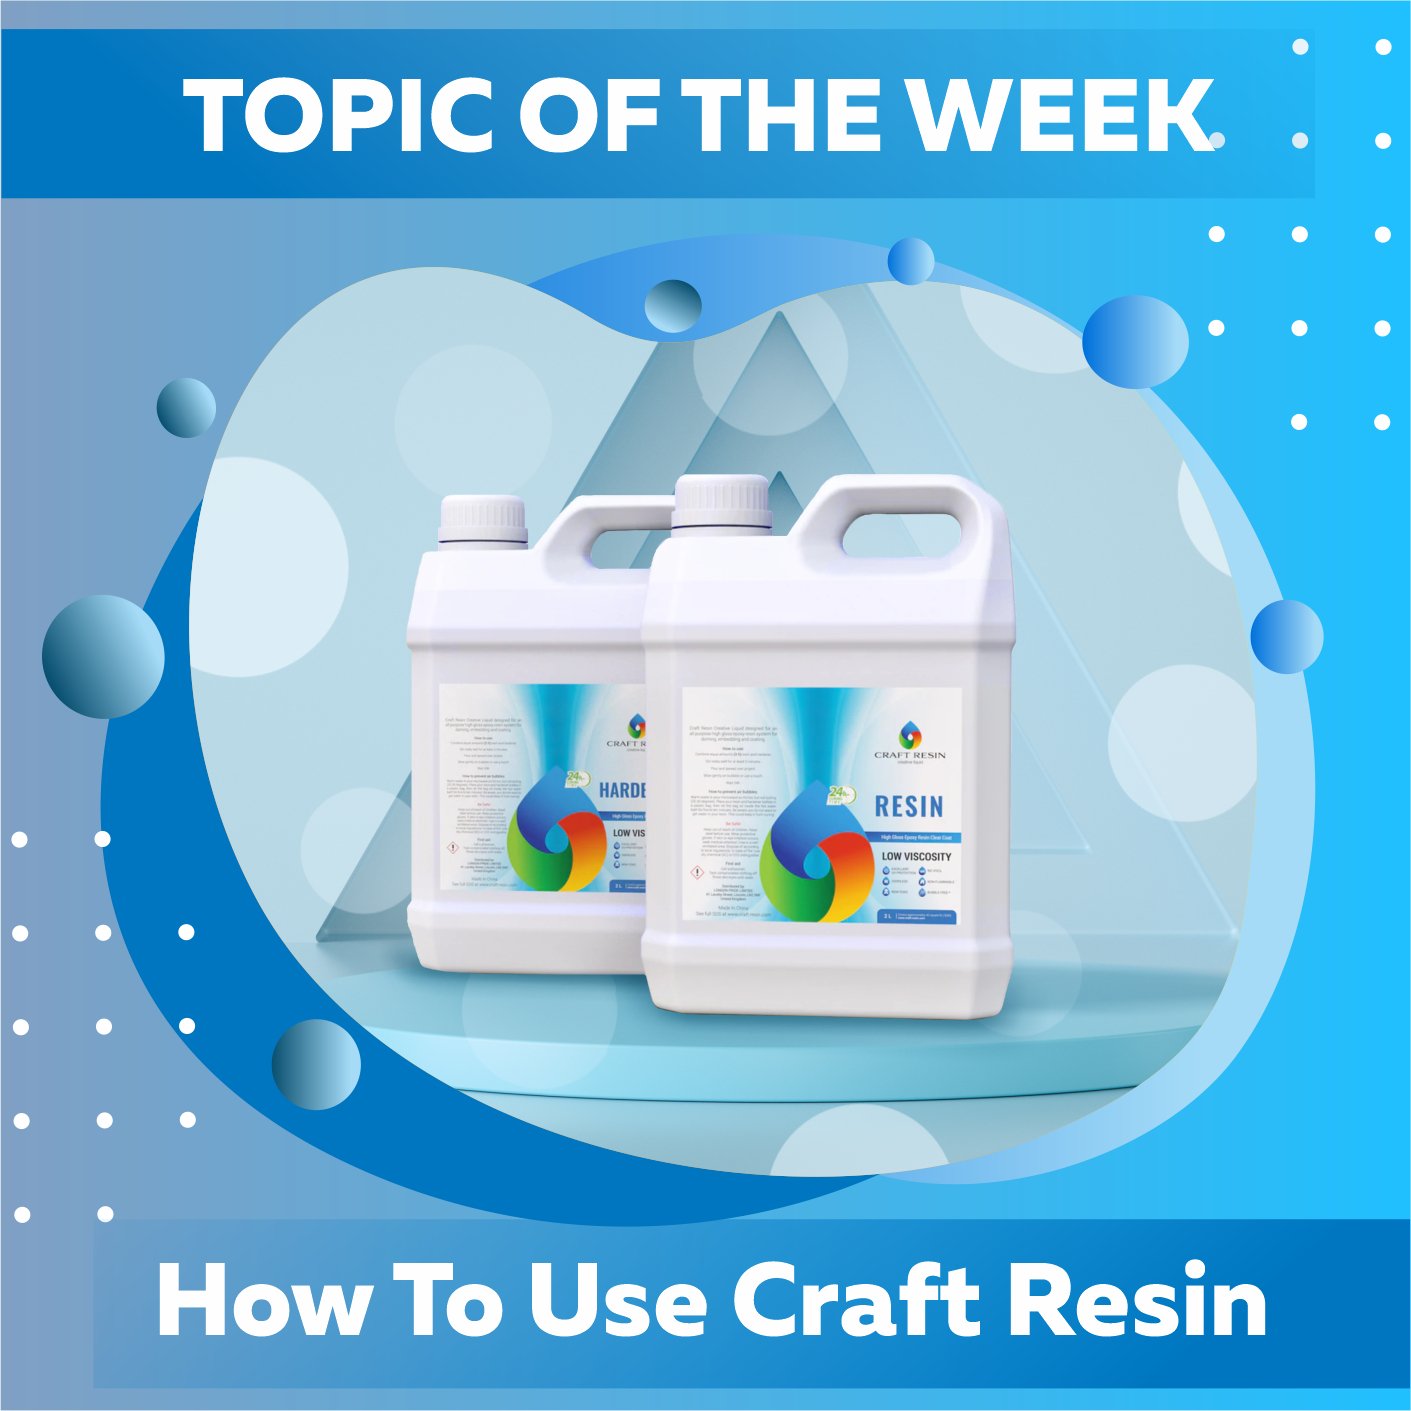 How To Use Craft Resin's Epoxy Resin - Craft Resin